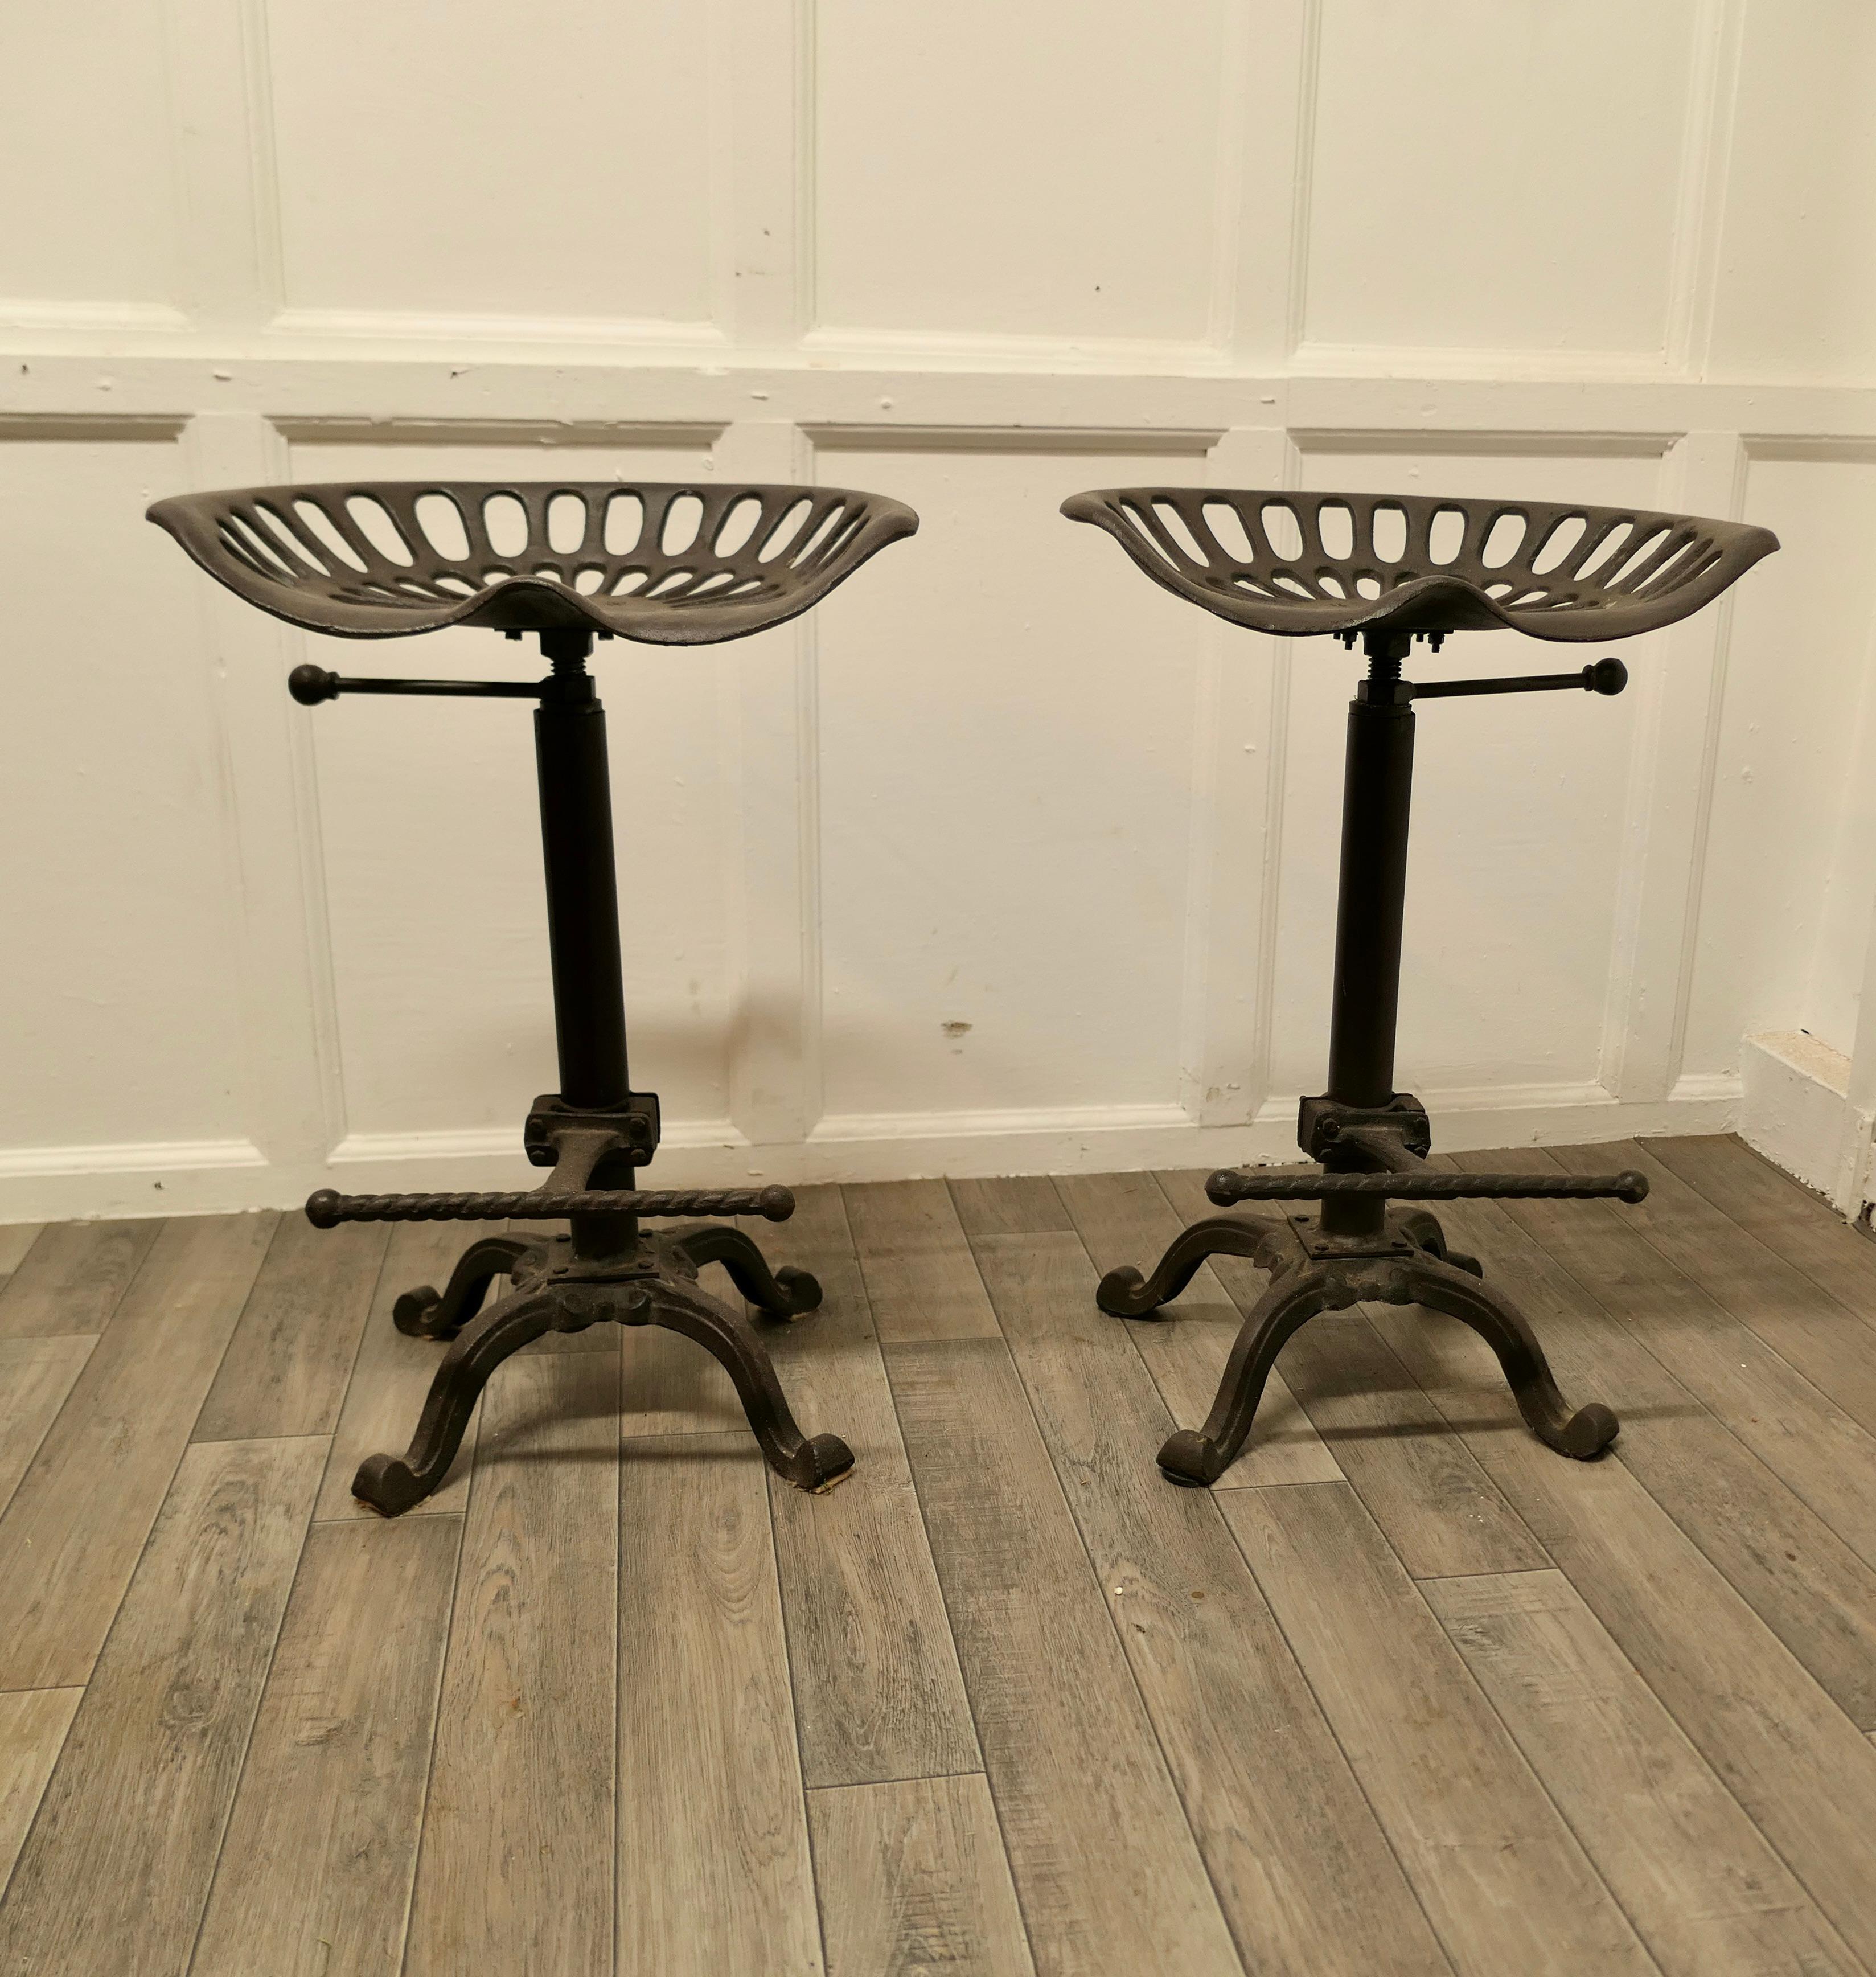 A pair of quirky tractor seat kitchen/bar high stools

Quirky Bar or Kitchen Stools these are a great pair for a Country or Industrial look interior design made in cast iron 
The seats raise and lower from 25” to 28” and the have a twisted foot